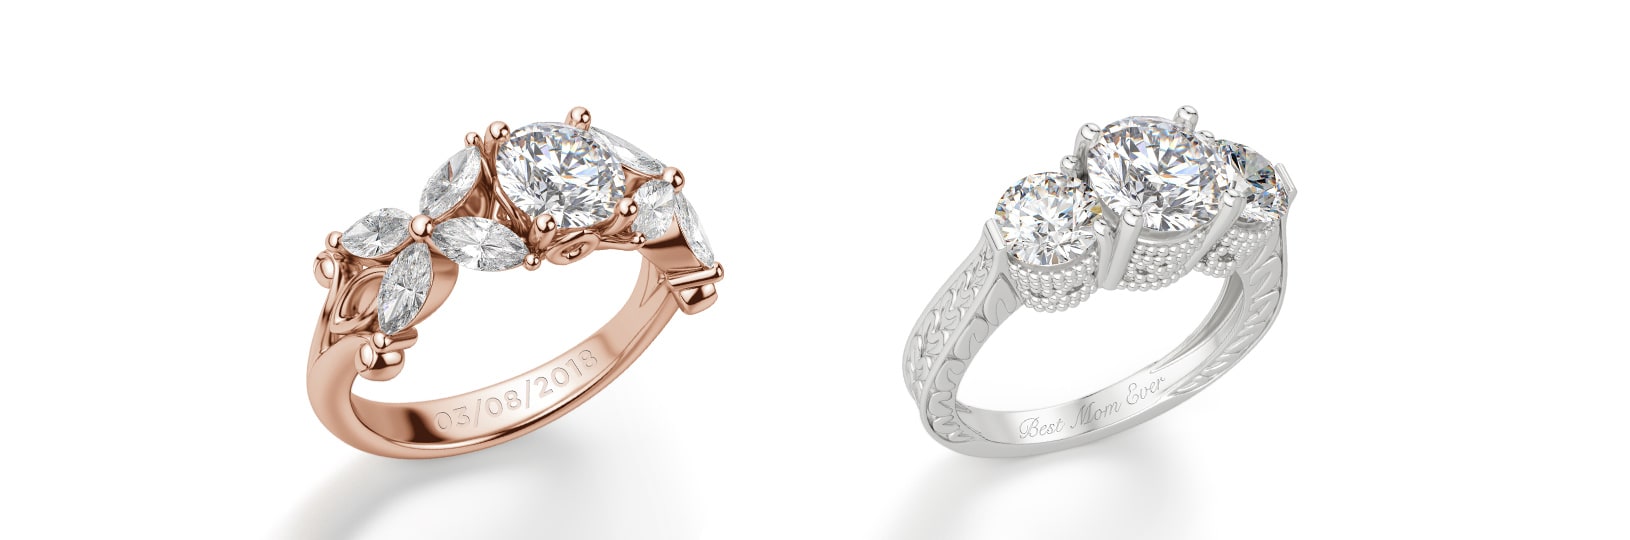 Two engagement rings with engraving